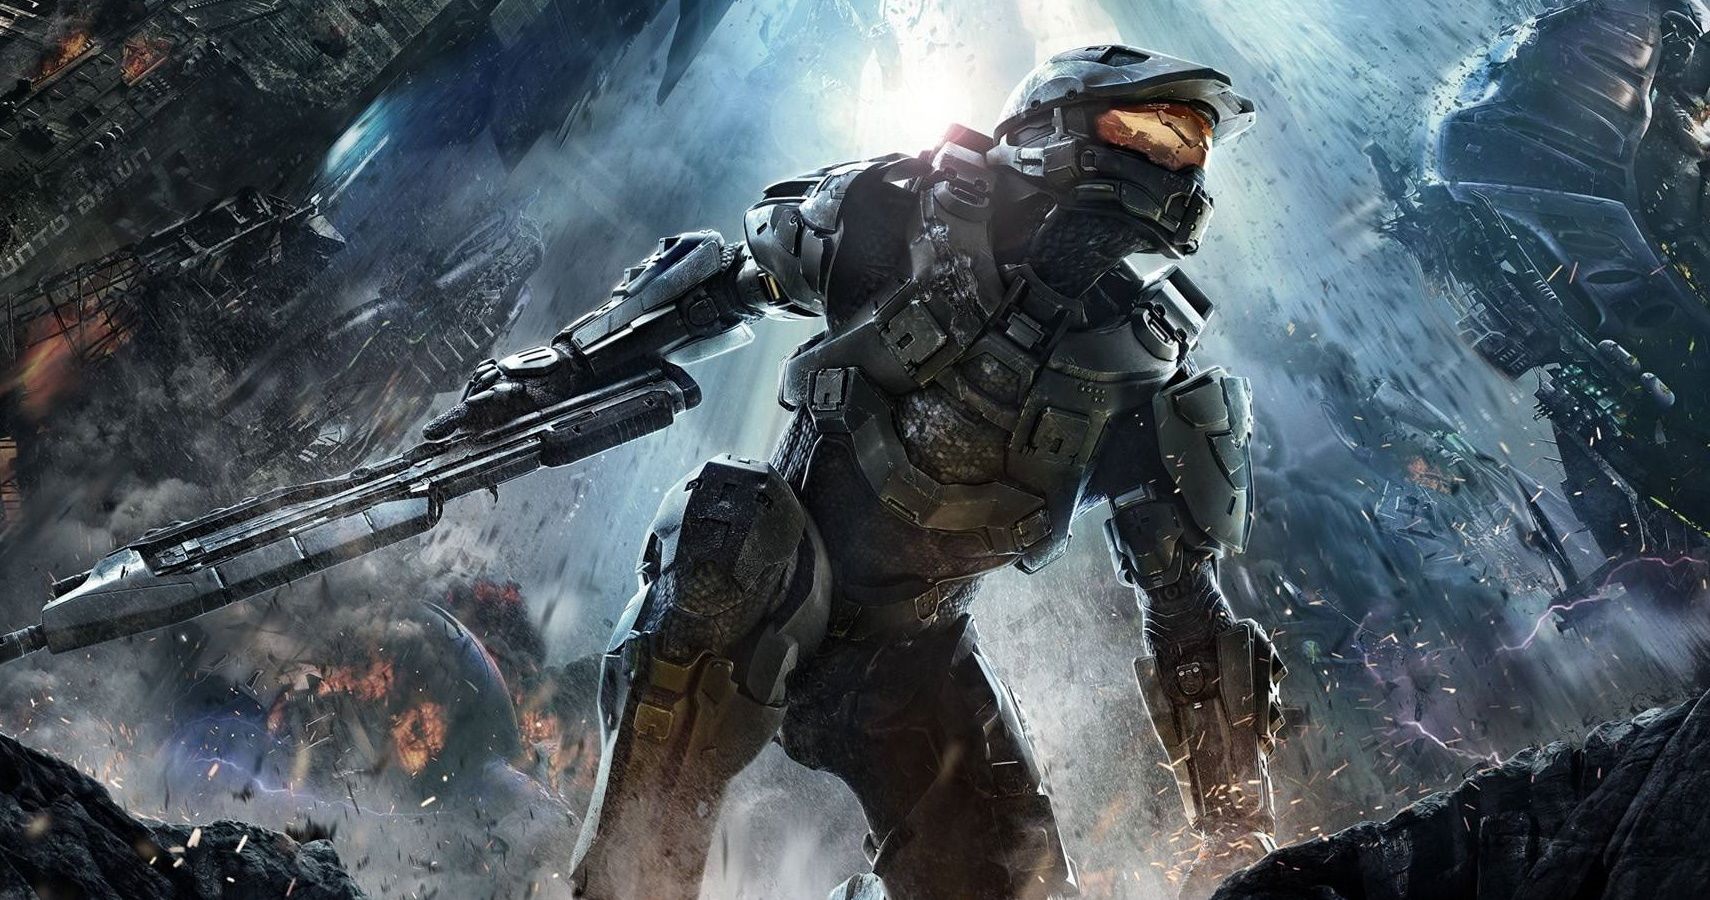 Halo 4 Comes To PC Today Heres What To Expect